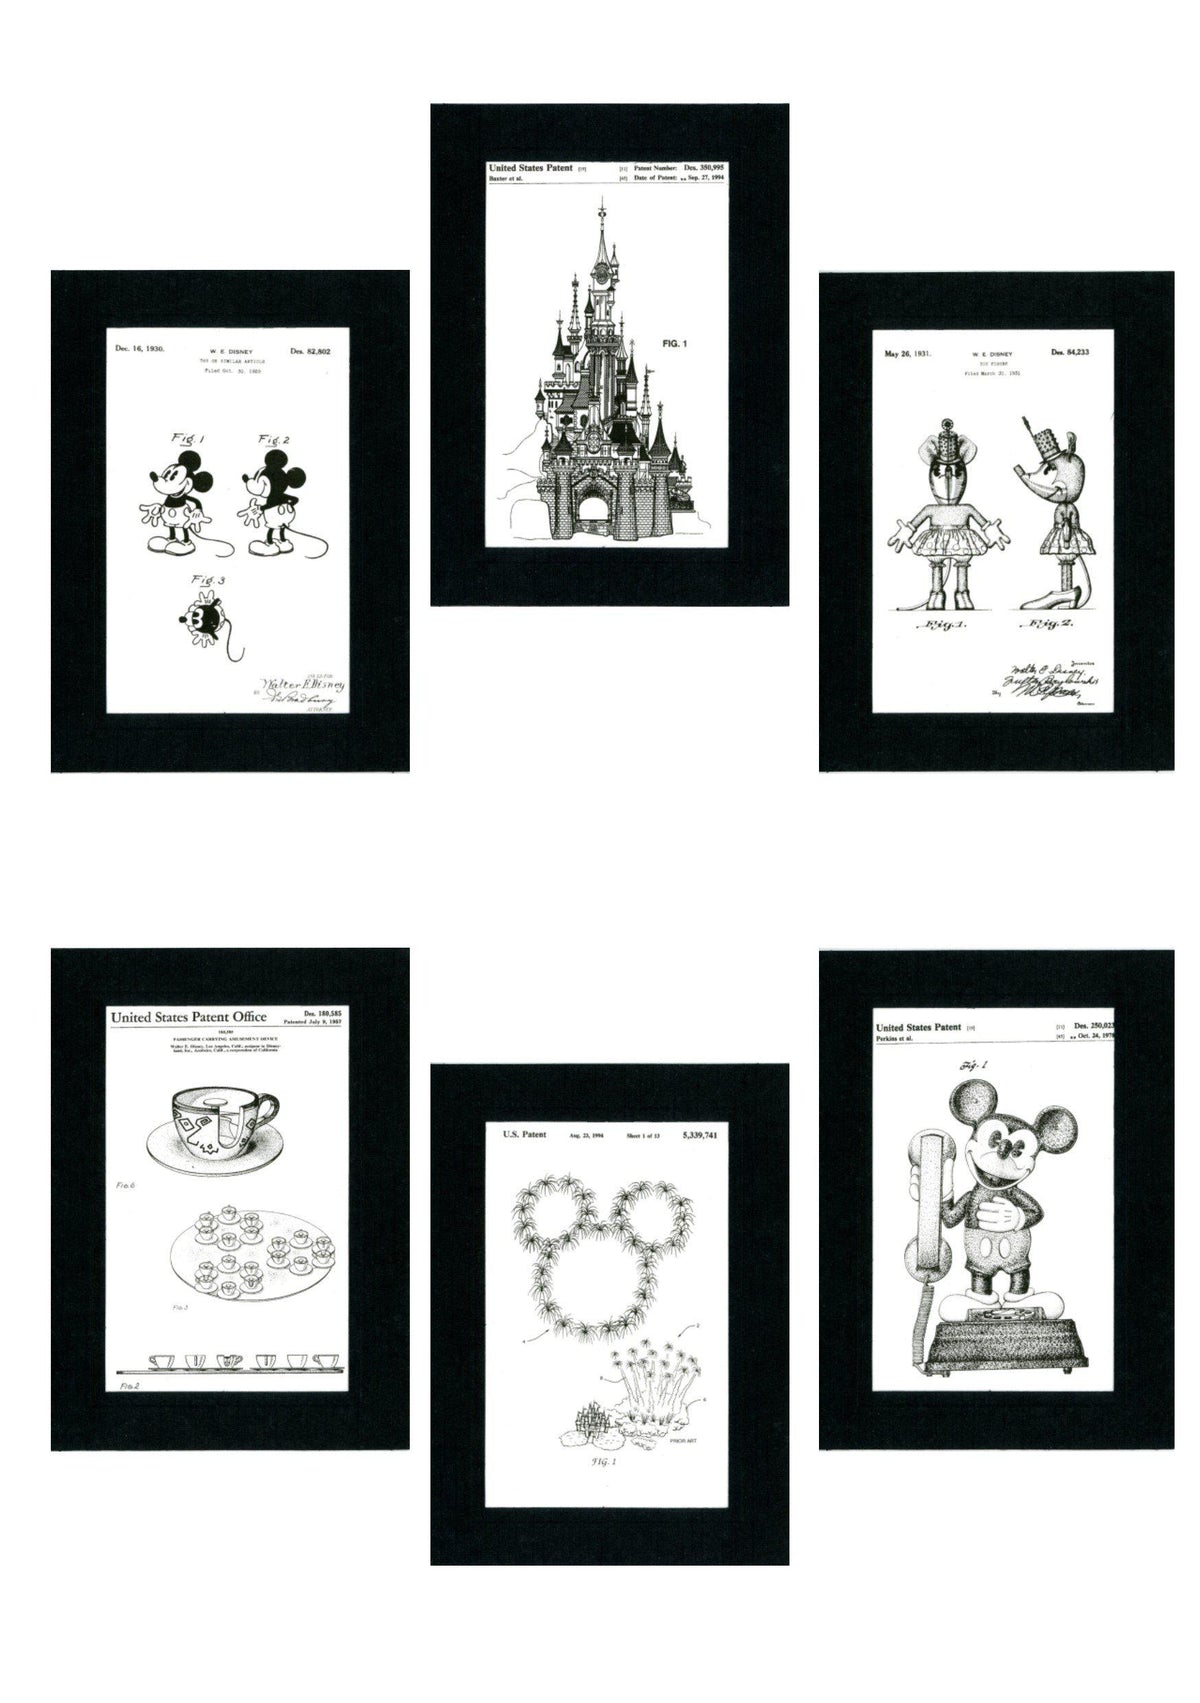 Disney Stickers/Borders Packaged - Mickey Phrases 